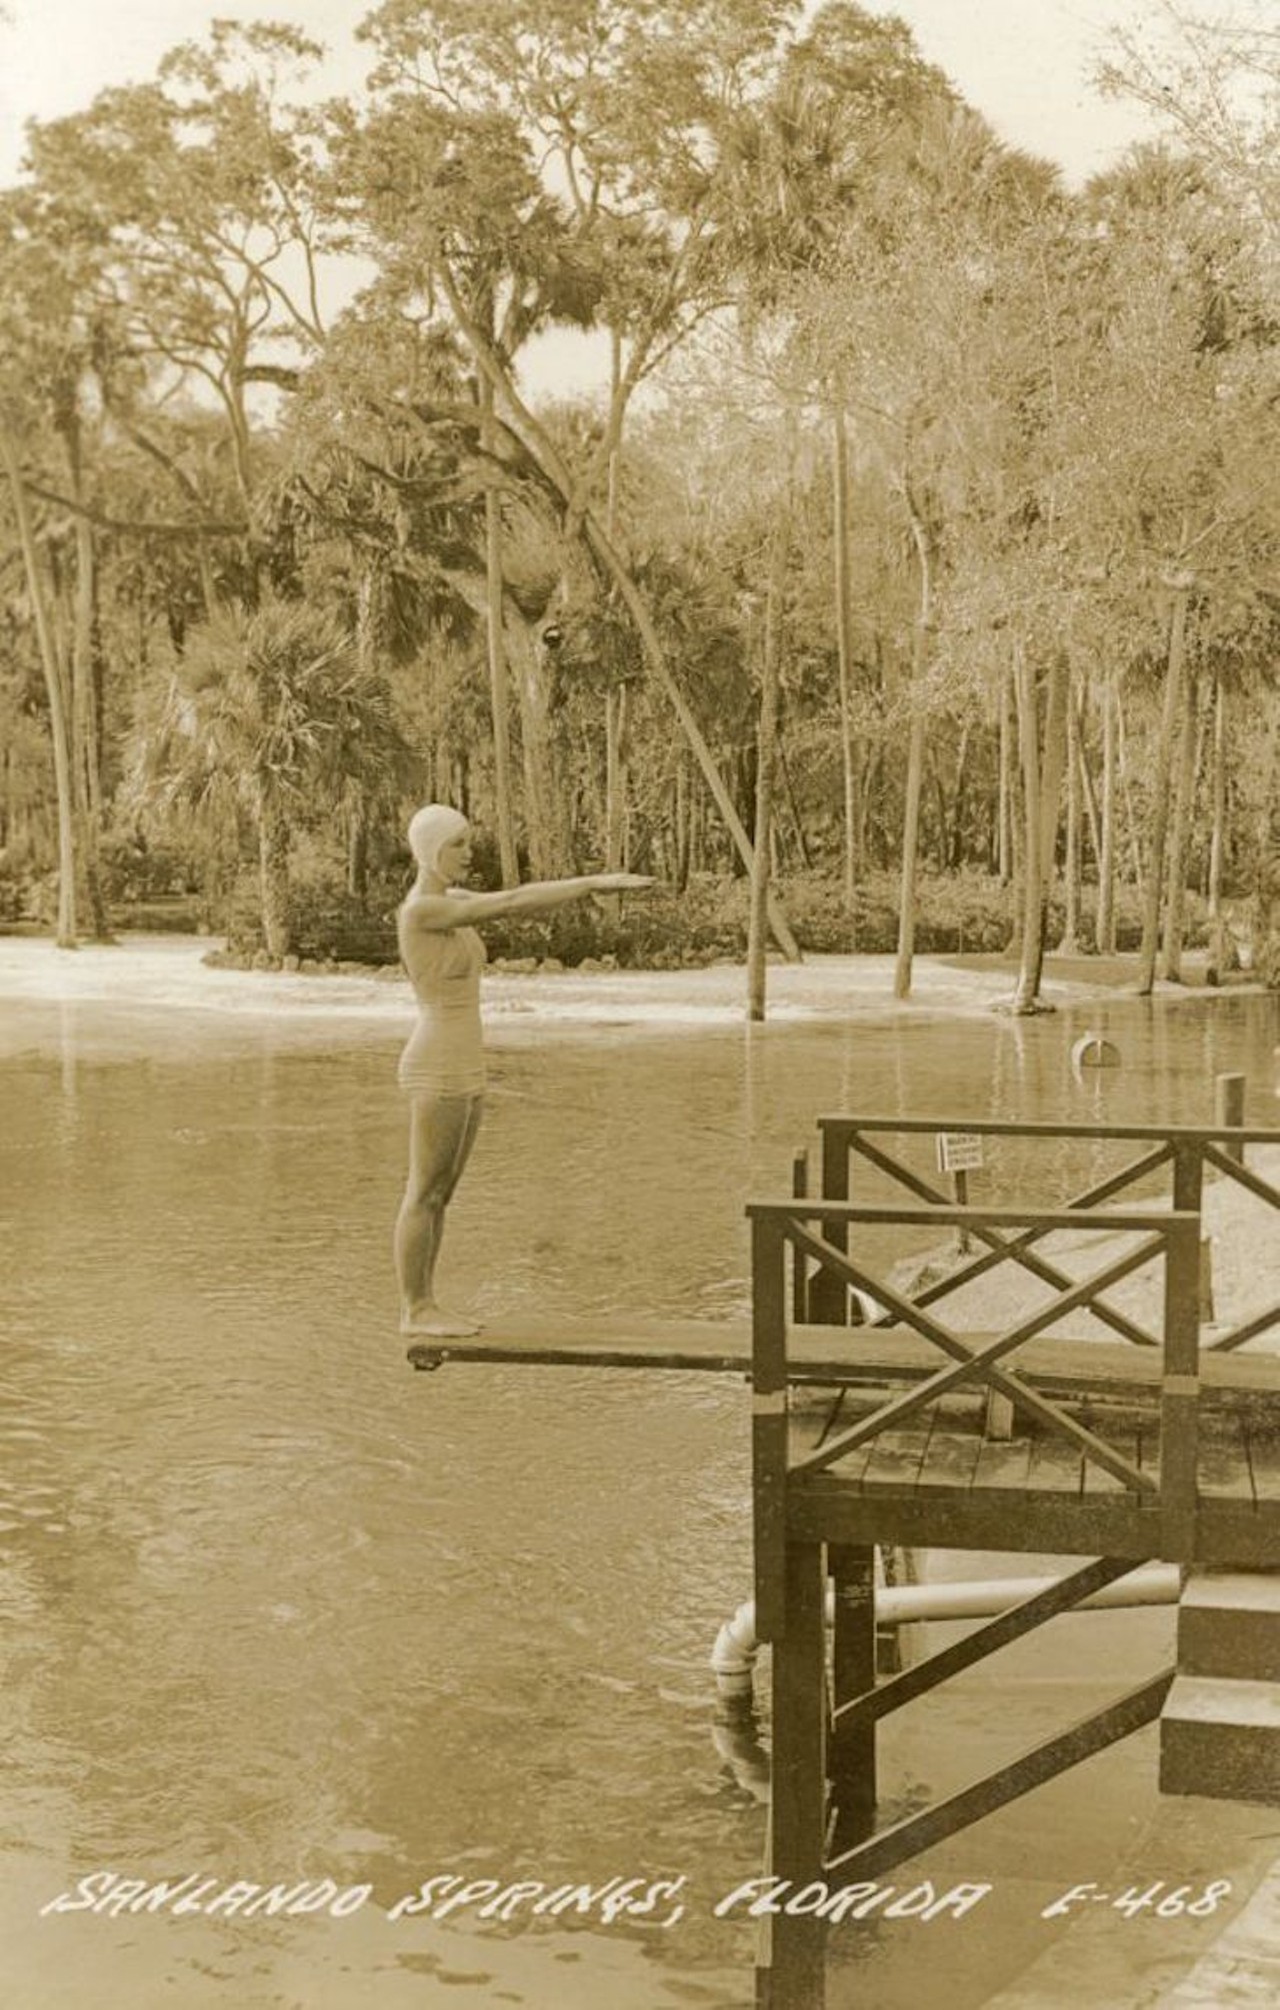 Woman using diving board at Sanlando Springs, likely after 1925.